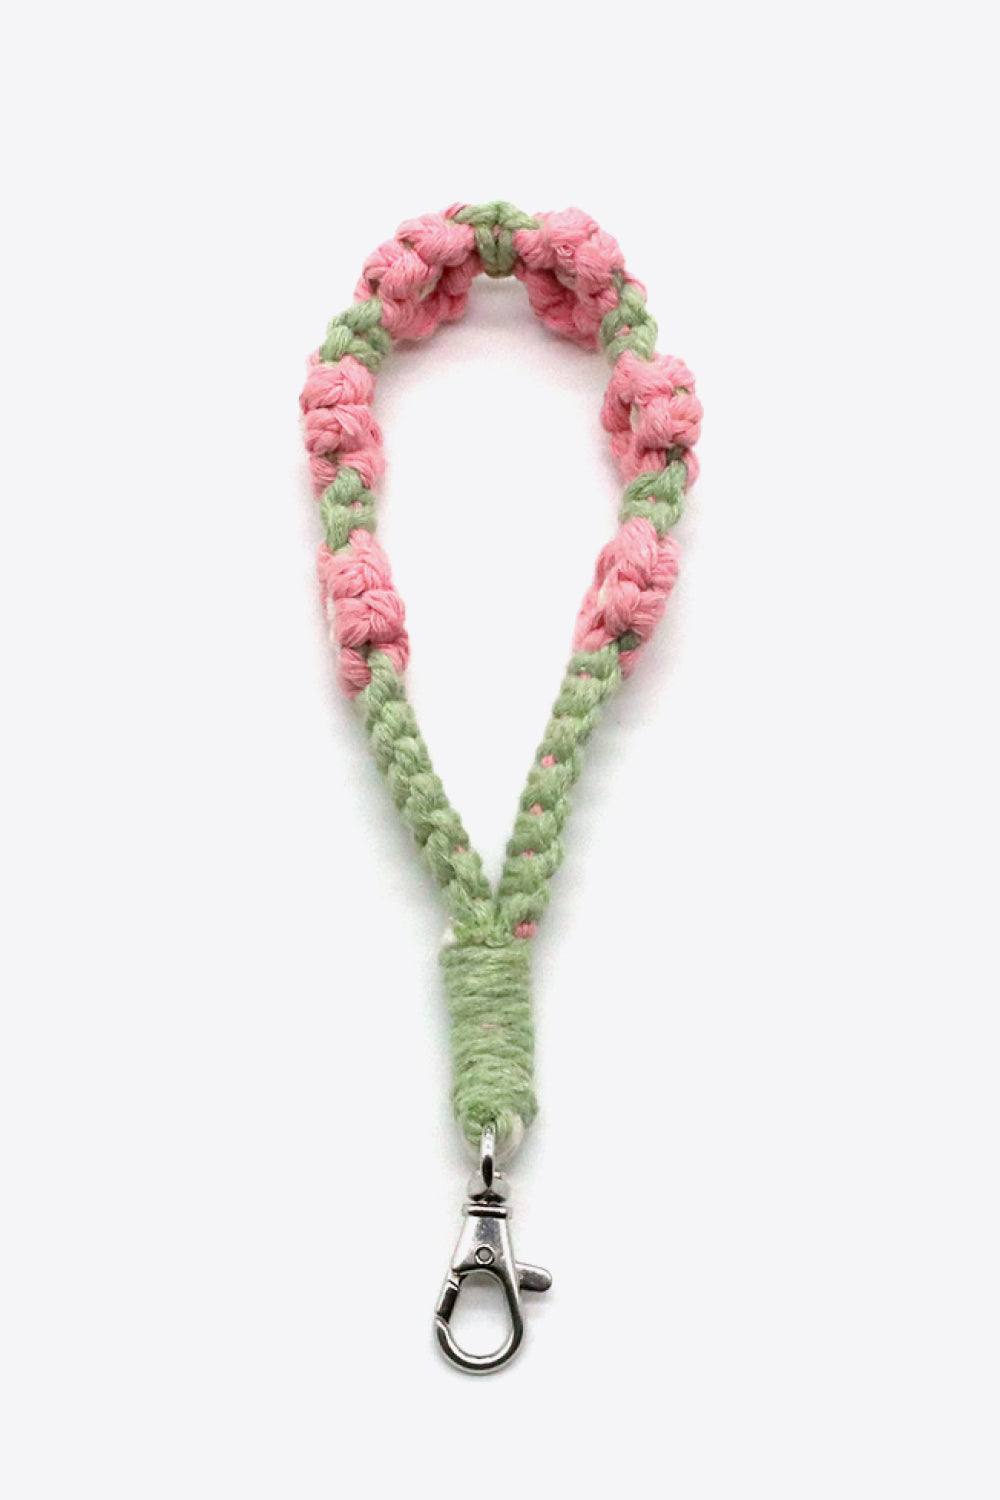 Trendsi Cupid Beauty Supplies Blush Pink / One Size Keychains 4-Pack Hand-Woven Flower Macrame Wristlet Keychain, Color Varies